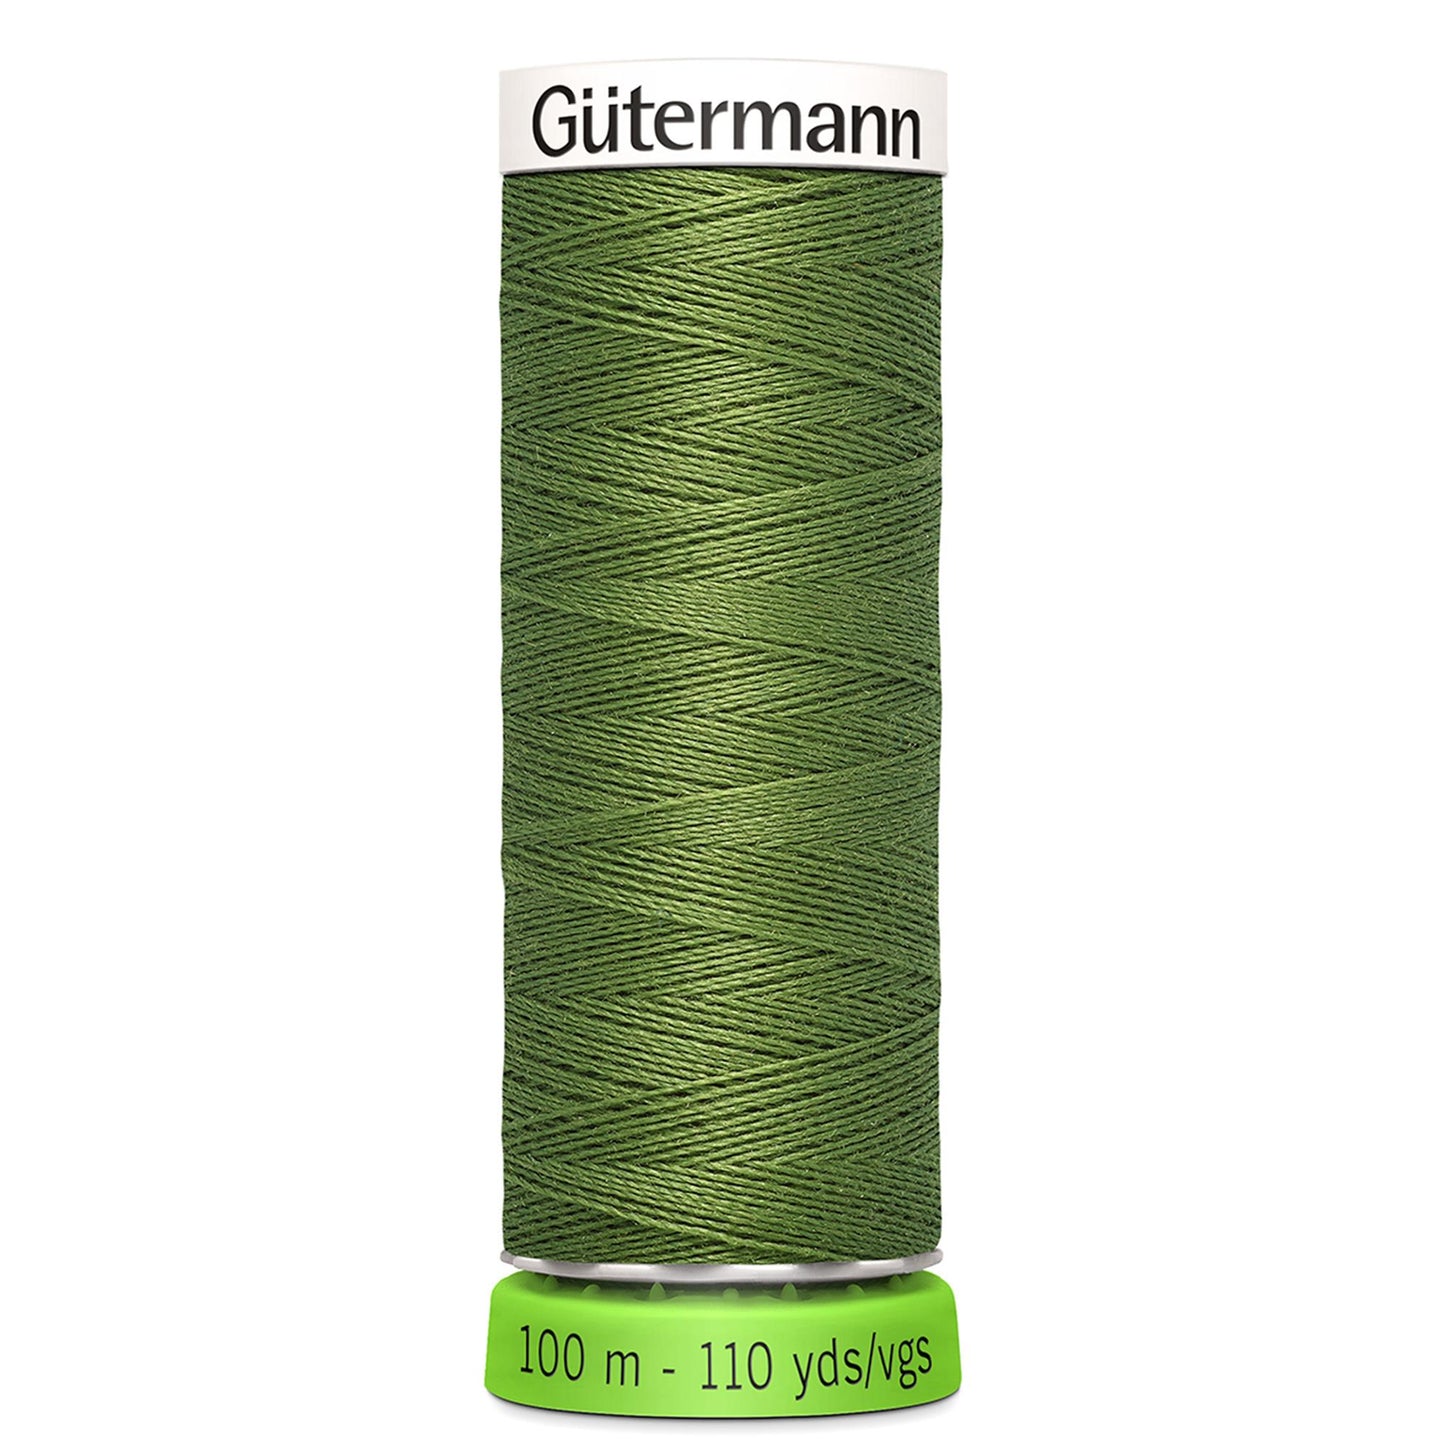 Gütermann rPet (100% Recycled) Sew-All Thread 100m - Col. 283 - Moss Green